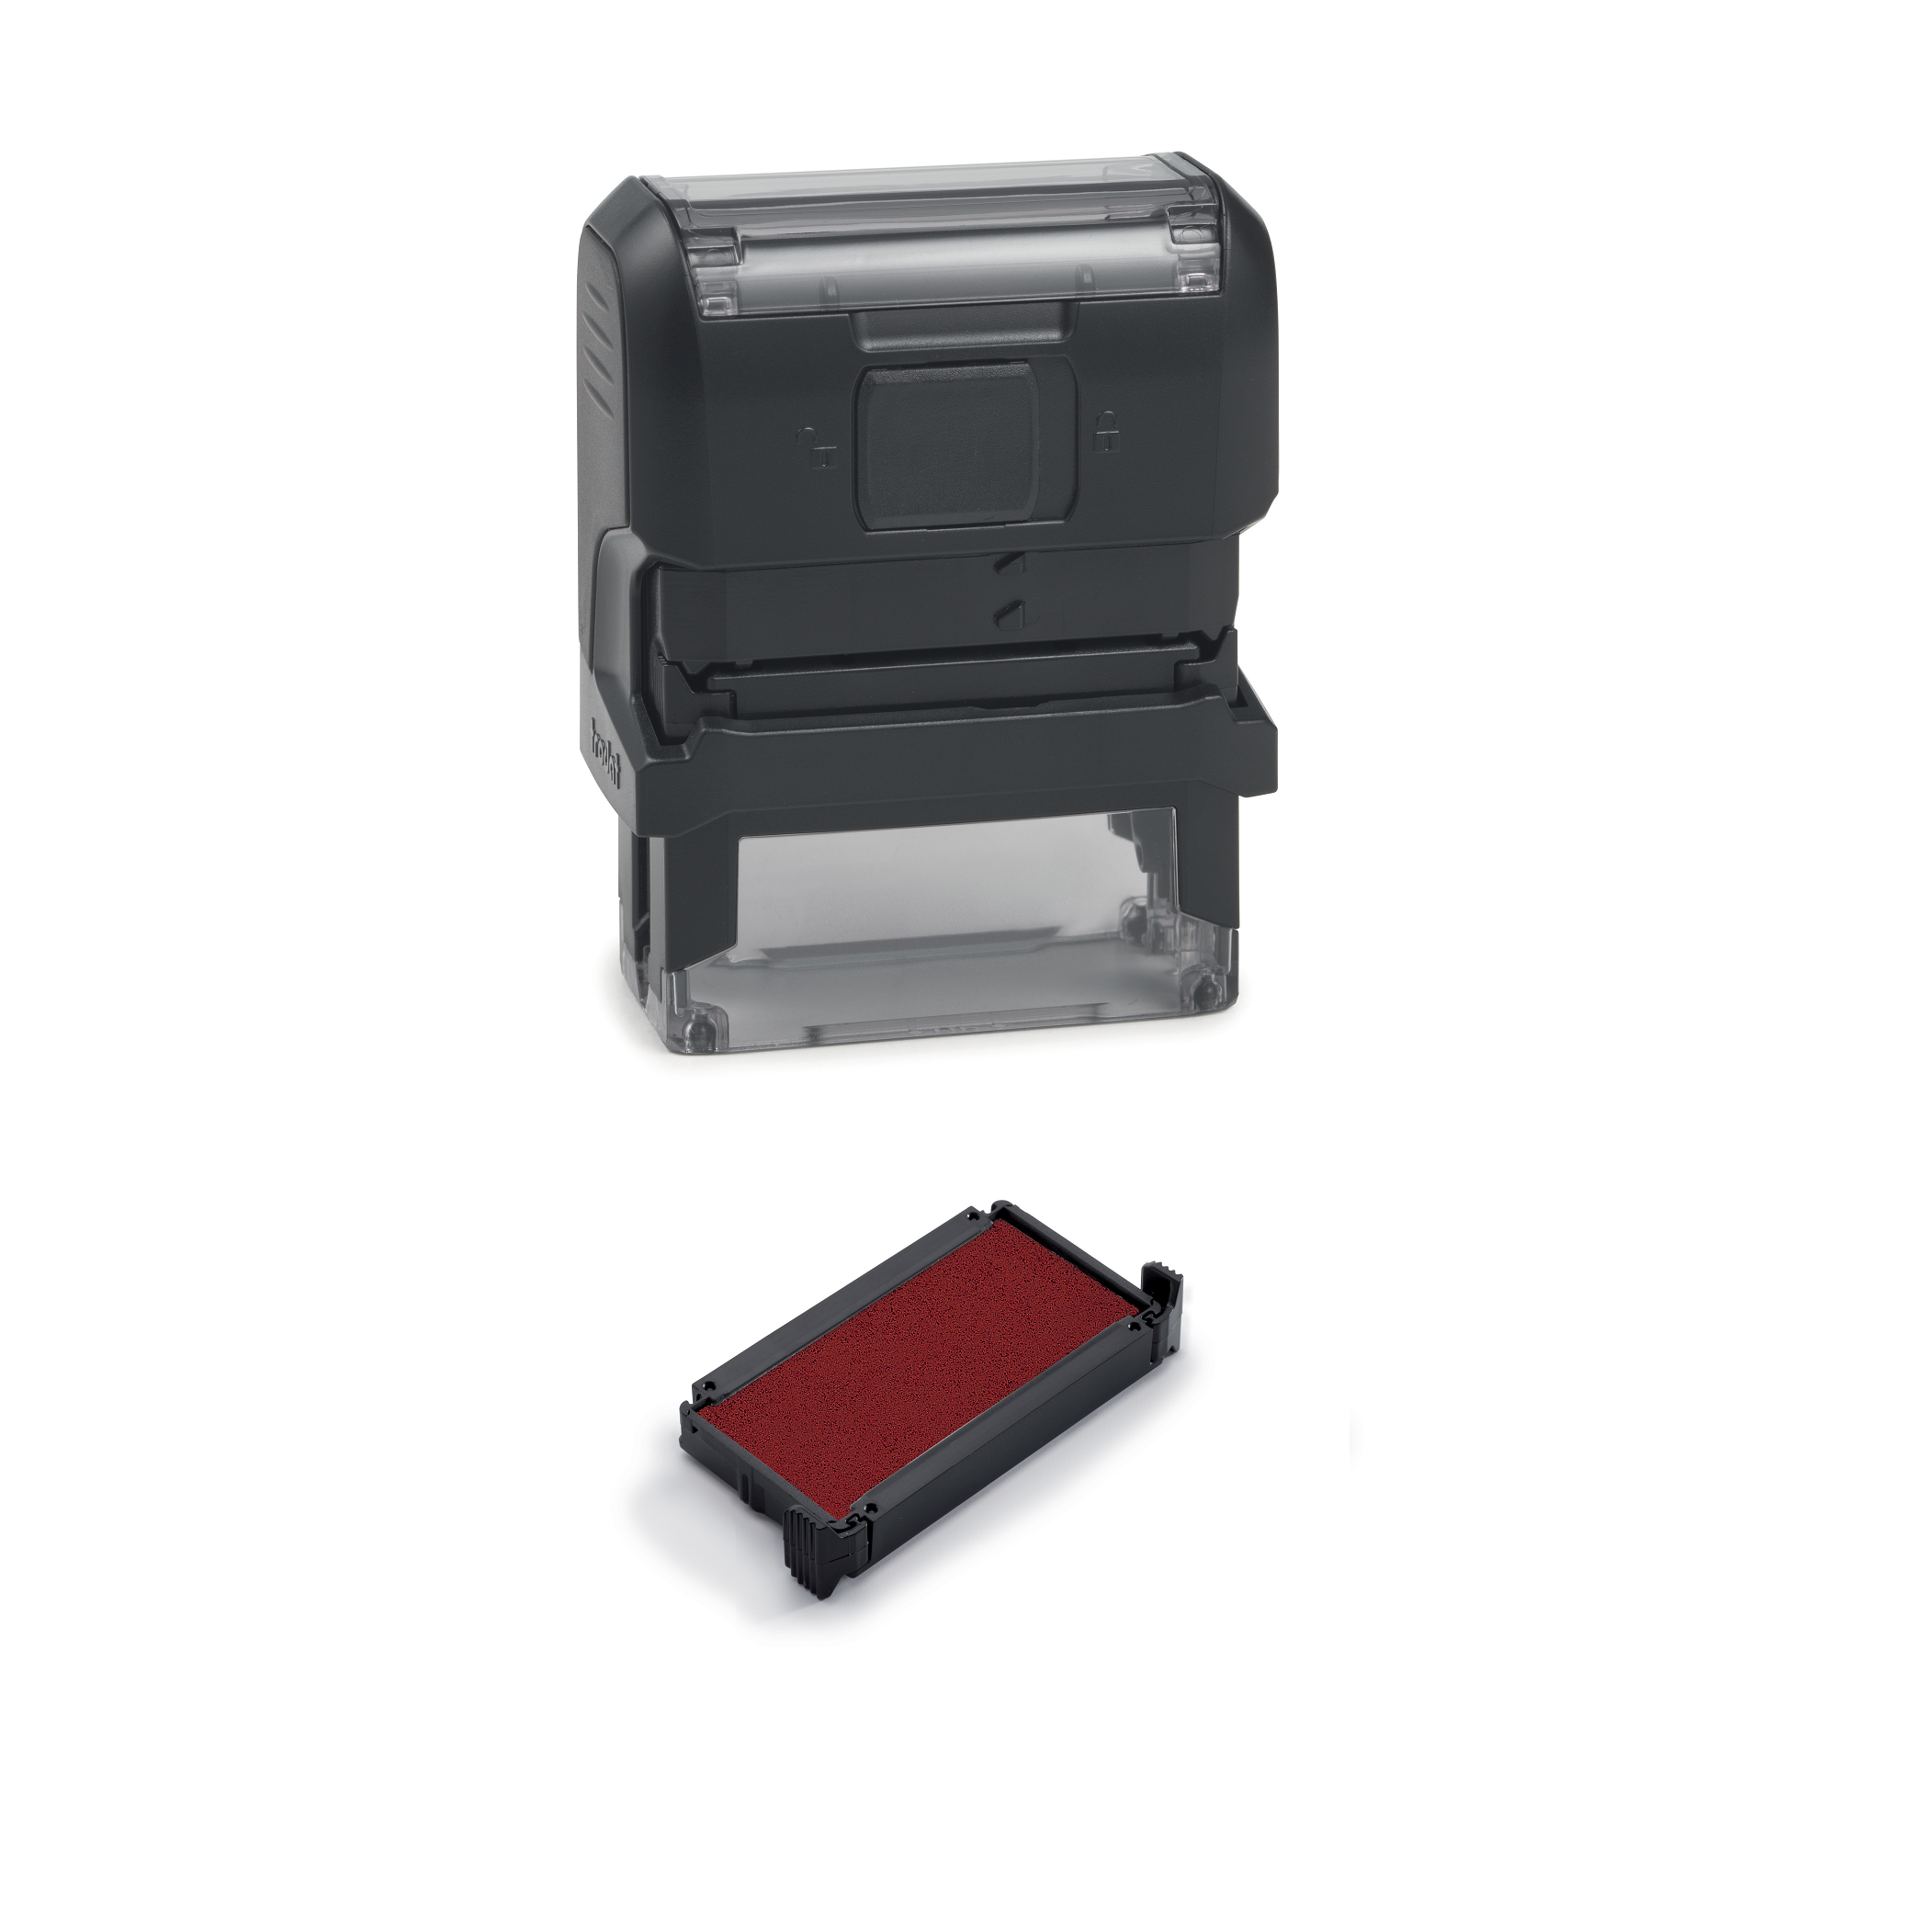 Electronically Filed Taxes Office Self Inking Rubber Stamp